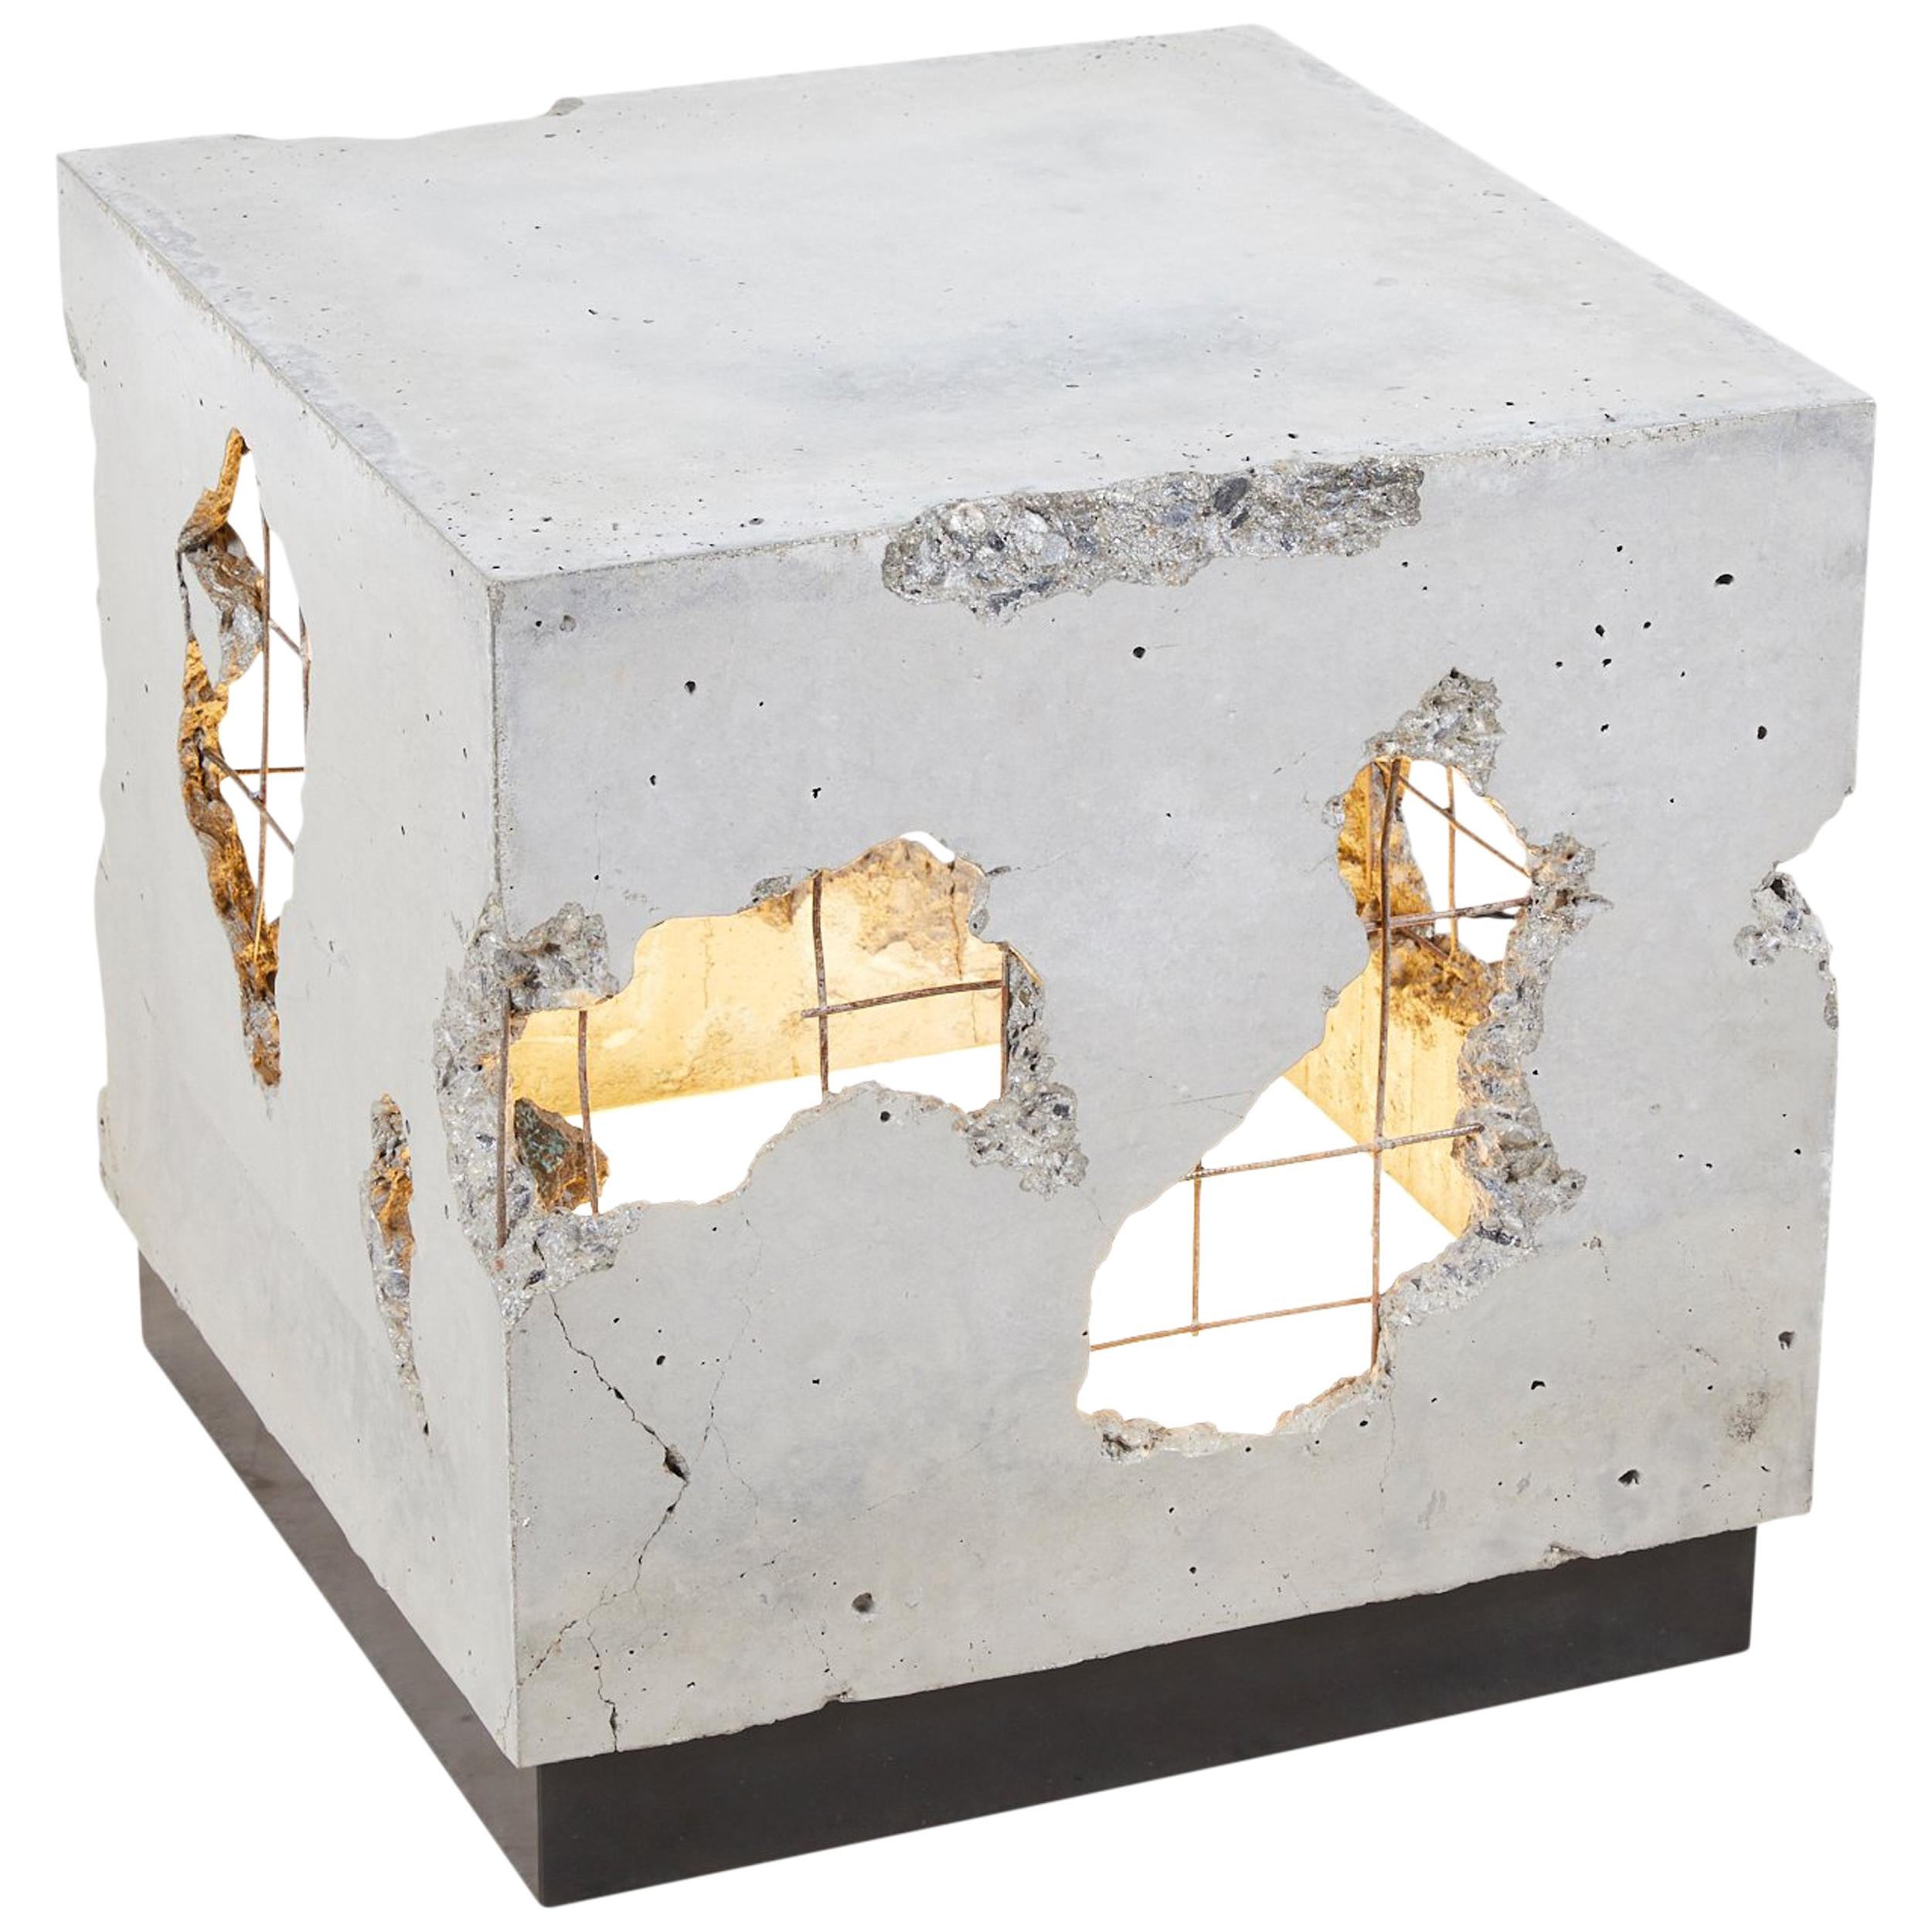 Fractured Cast-Concrete Illuminated Minimal End Table "Cracked Side Table"